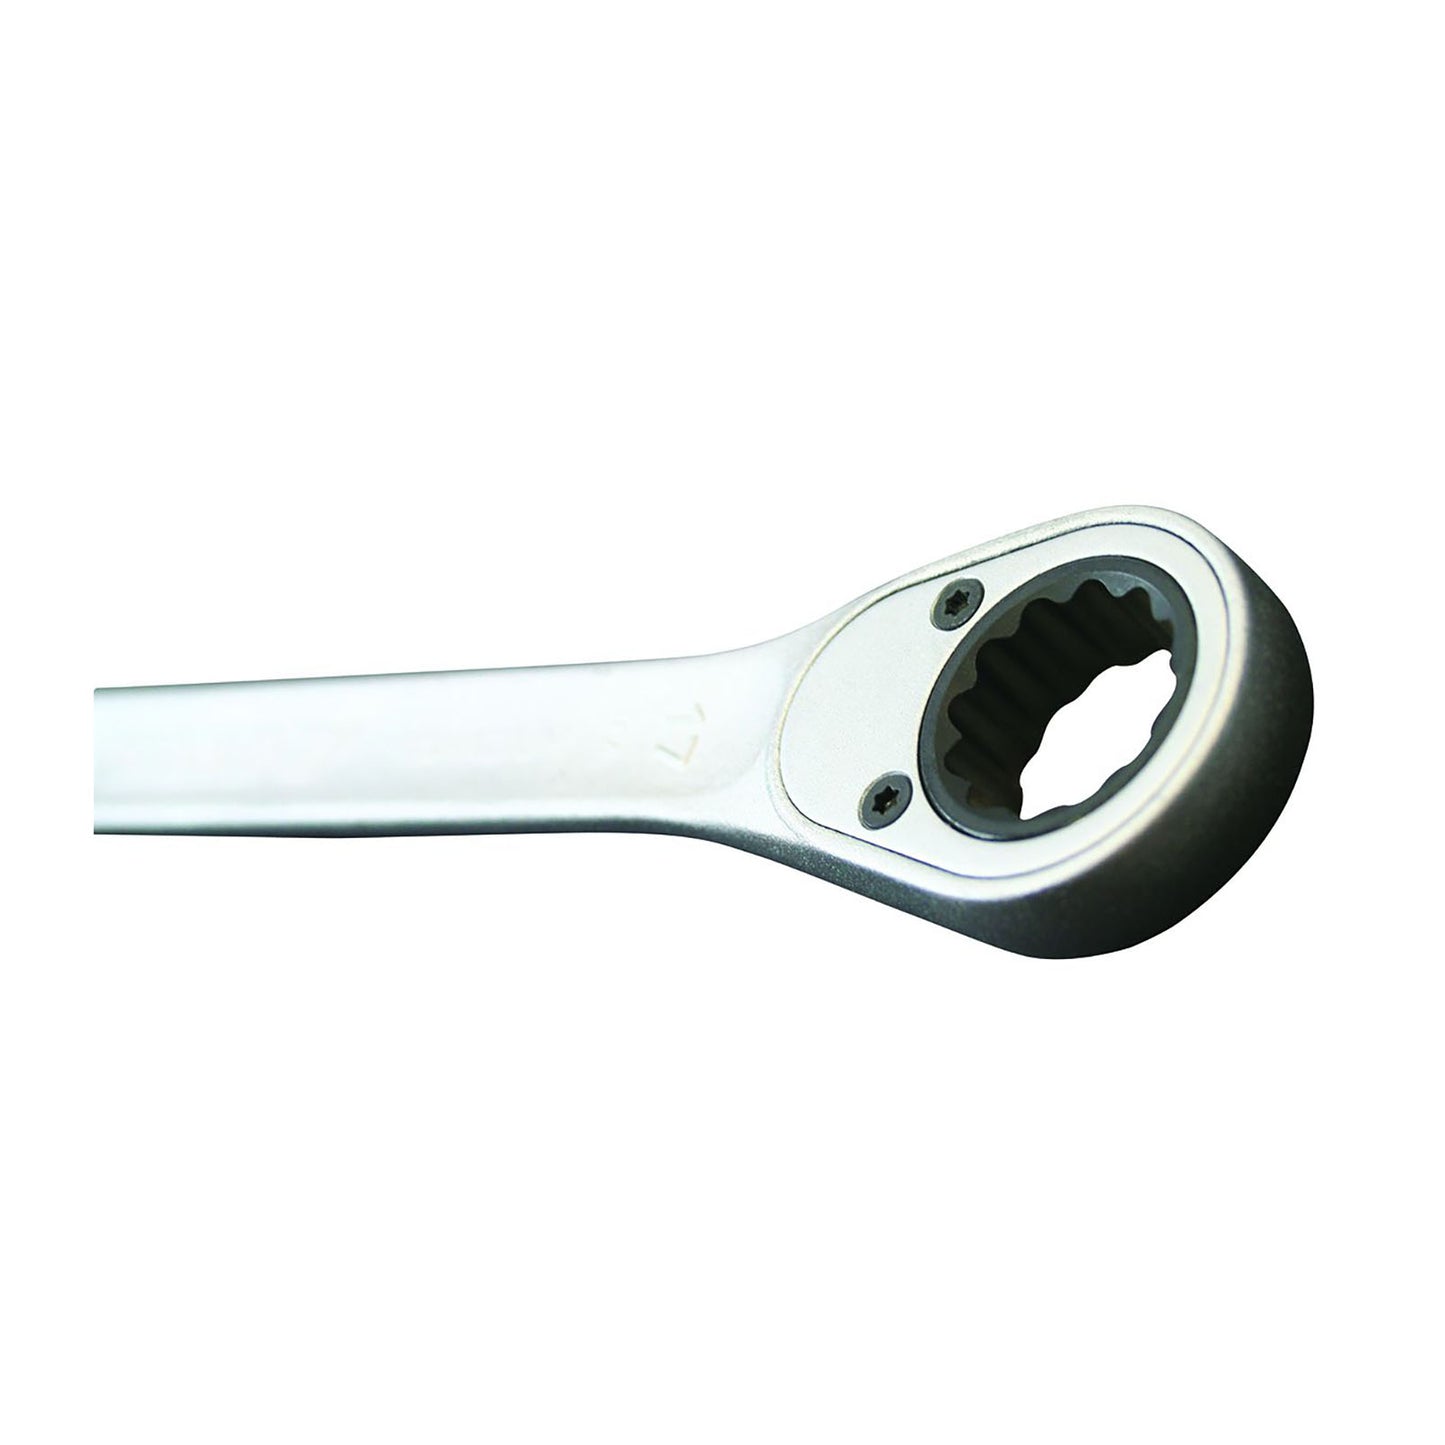 GEDORE 7 R 15 - Ratchet combination wrench, 15mm (2297132)